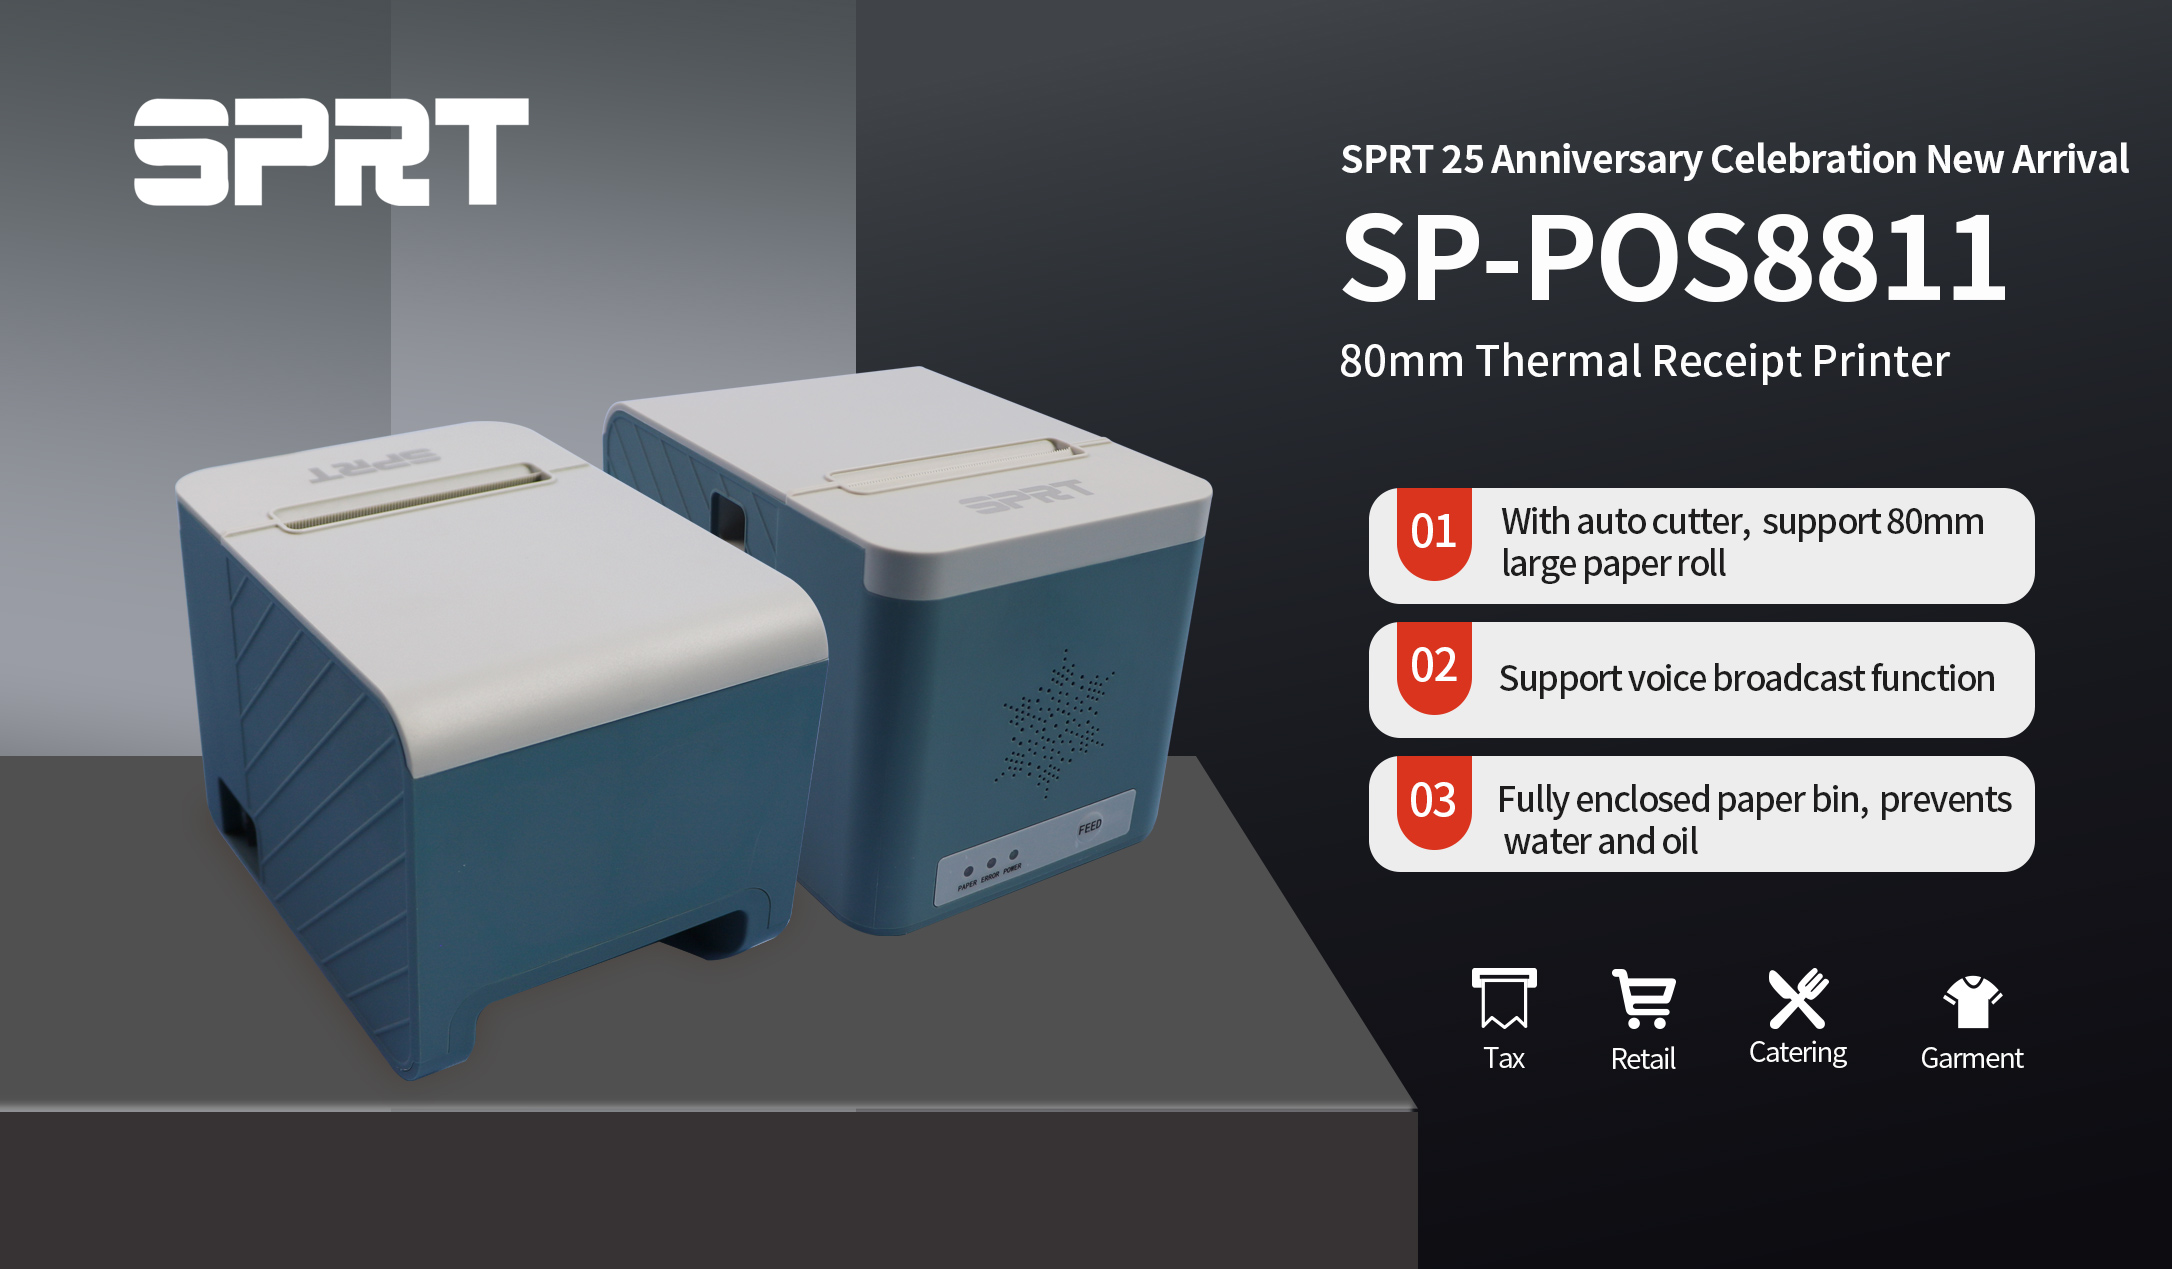 Introducing Our Latest Model POS8811, the Perfect Blend of Innovation and Efficiency!